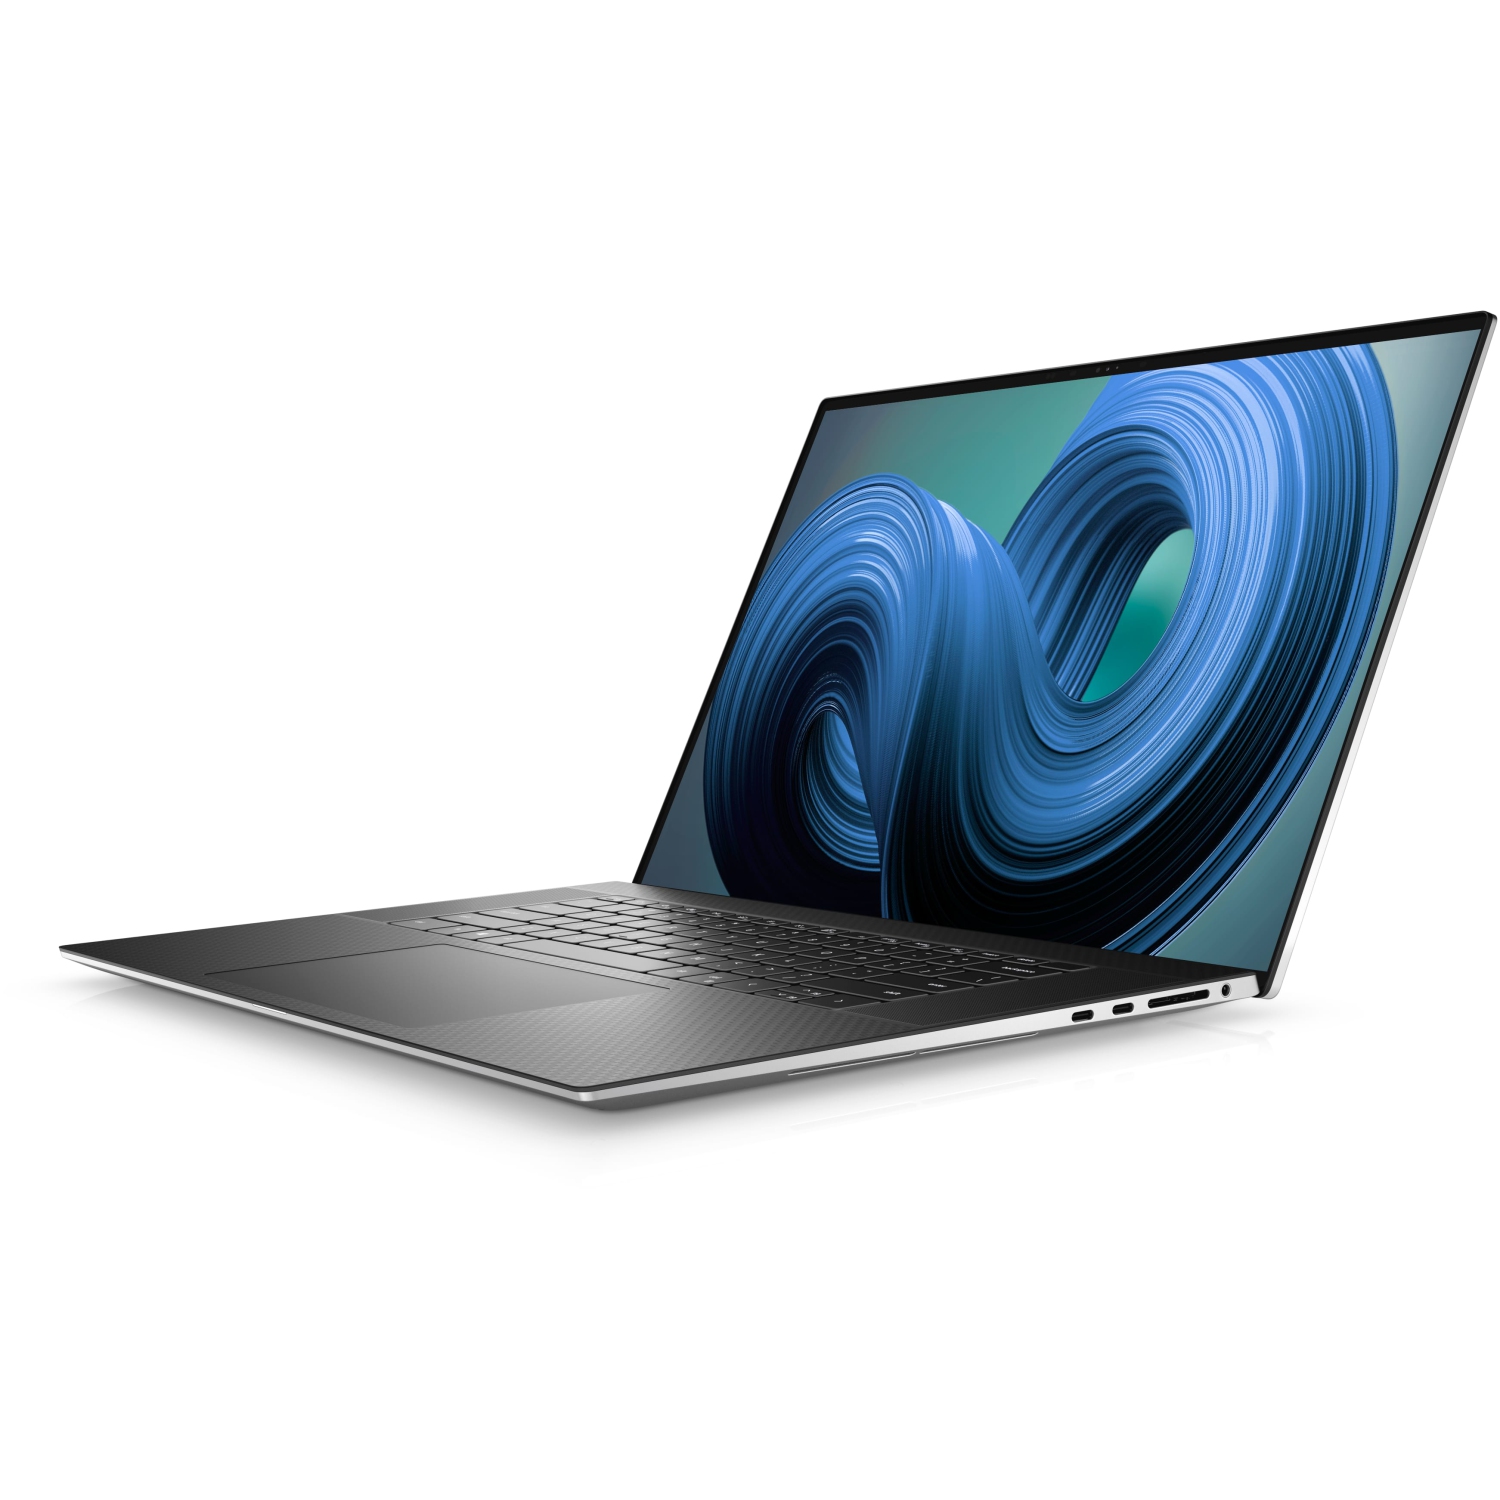 Refurbished (Excellent) – Dell XPS 9720 Laptop (2022) | 17" 4K Touch | Core i7 - 512GB SSD - 32GB RAM - RTX 3050 | 14 Cores @ 4.7 GHz - 12th Gen CPU